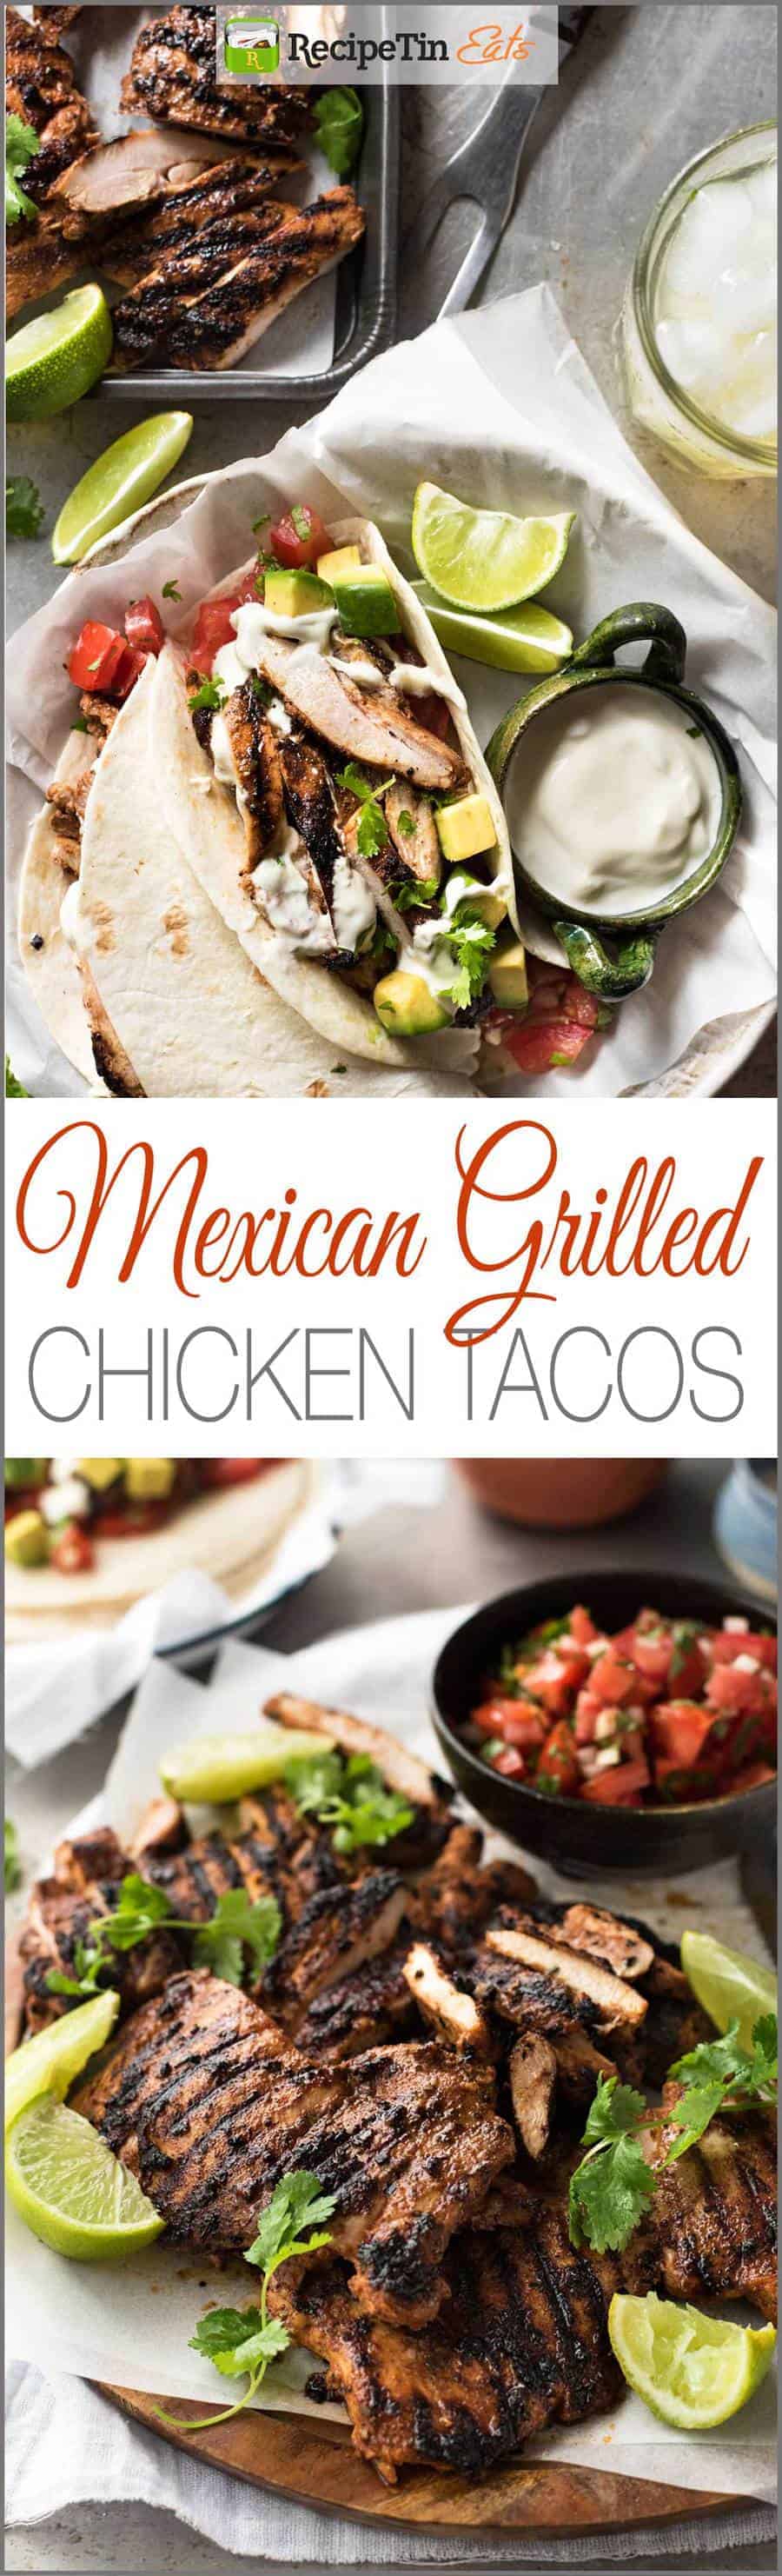 Mexican Grilled Chicken Tacos - Real Mexican street food marinade that's easy to make and packs a big flavour punch!